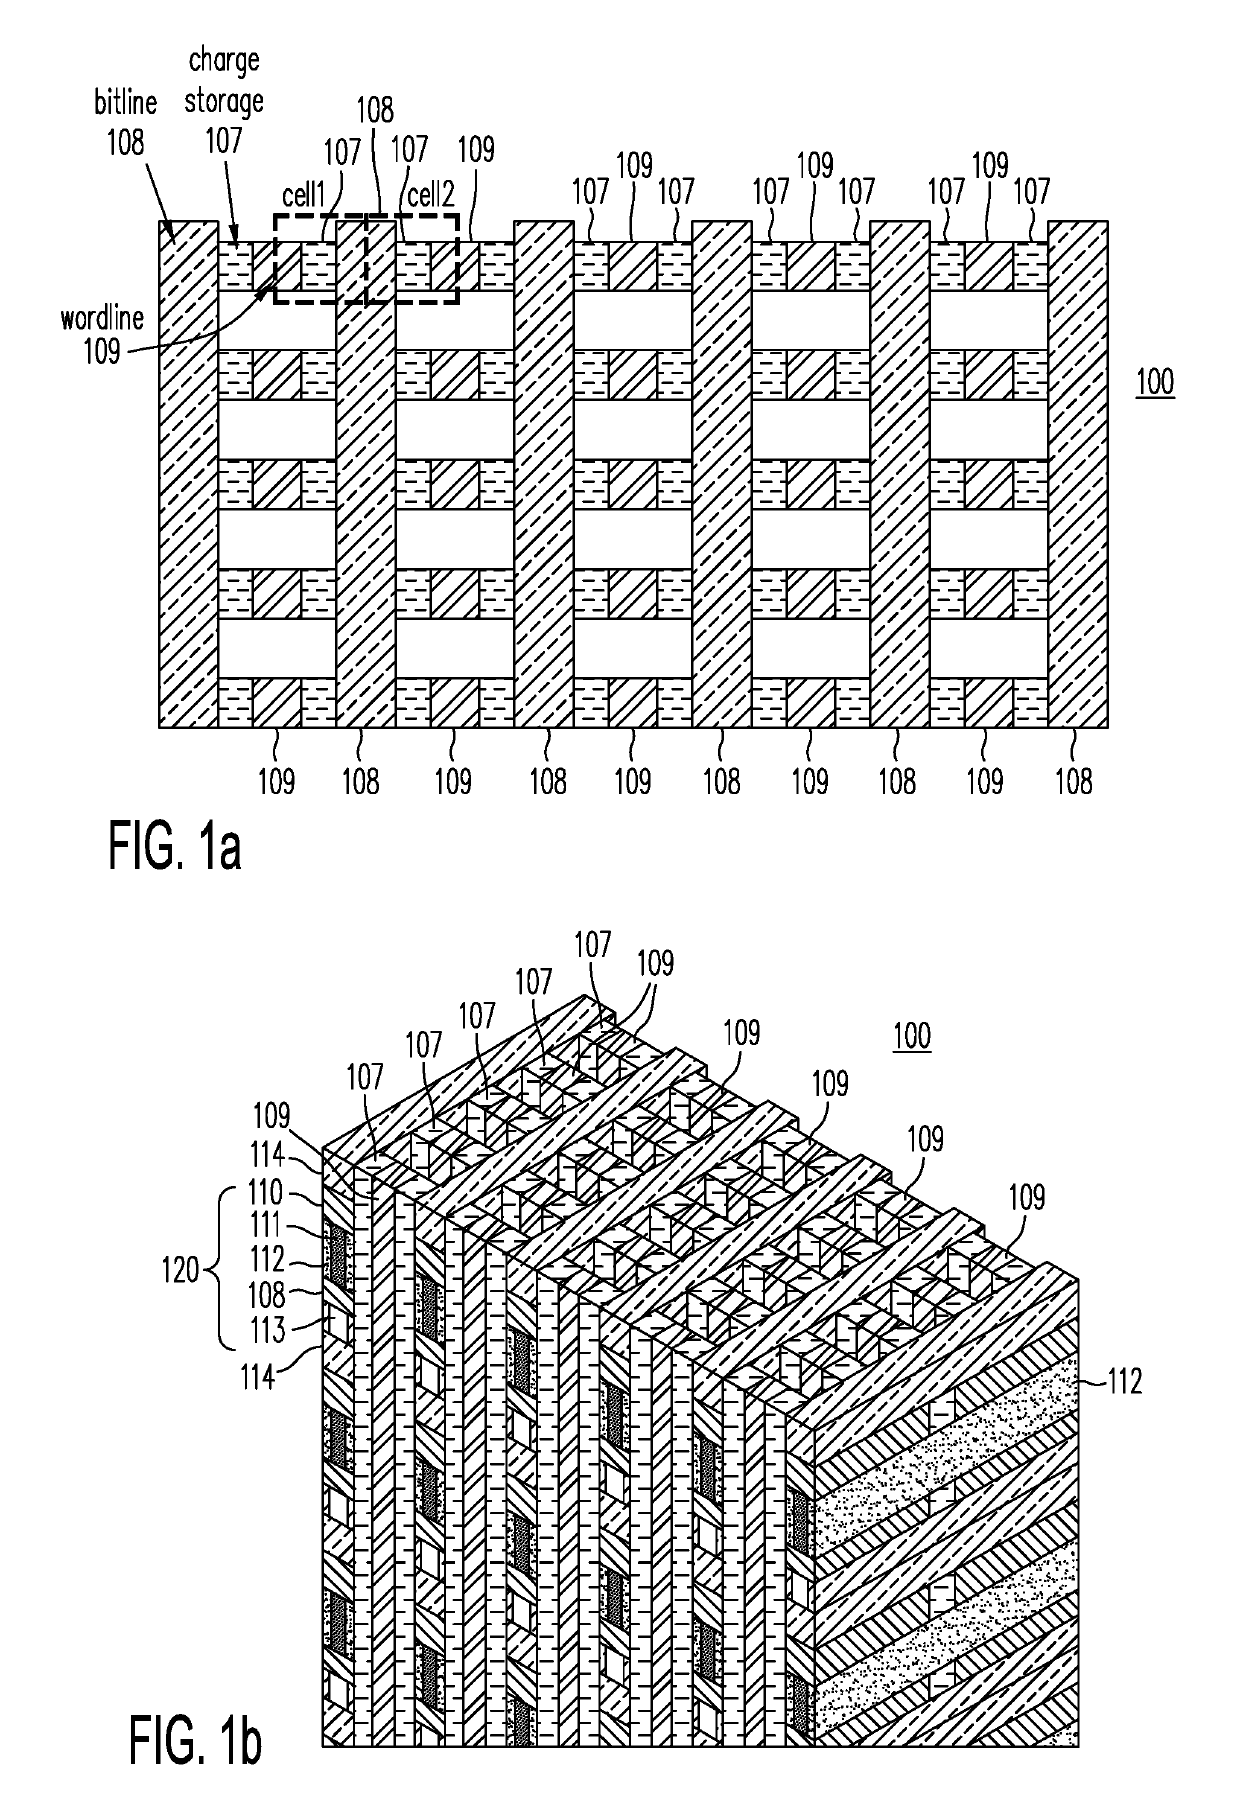 Staggered word line architecture for reduced disturb in 3-dimensional NOR memory arrays